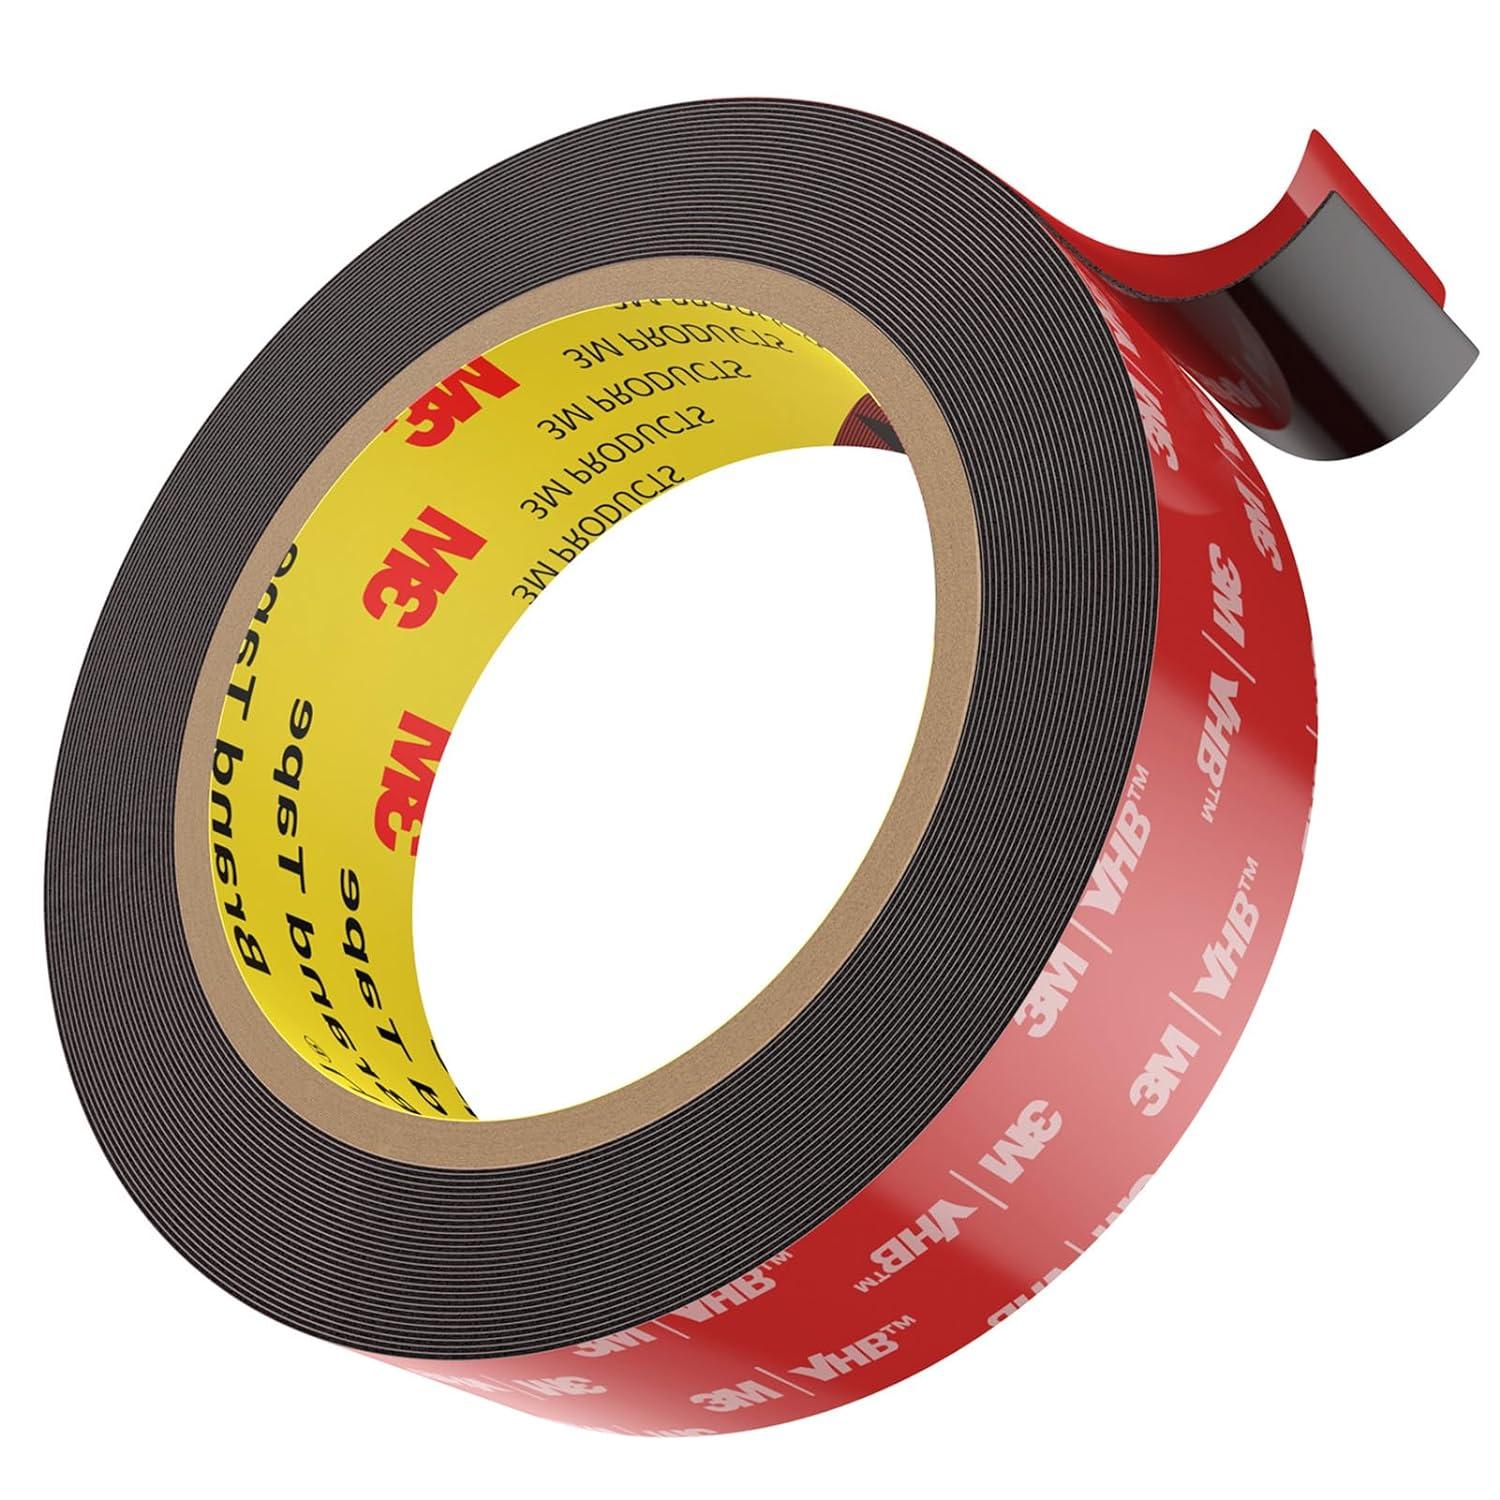 emitever double sided tape heavy duty mounting tape 23ft x 0 6in two sided acrylic foam tape 2 sided strong